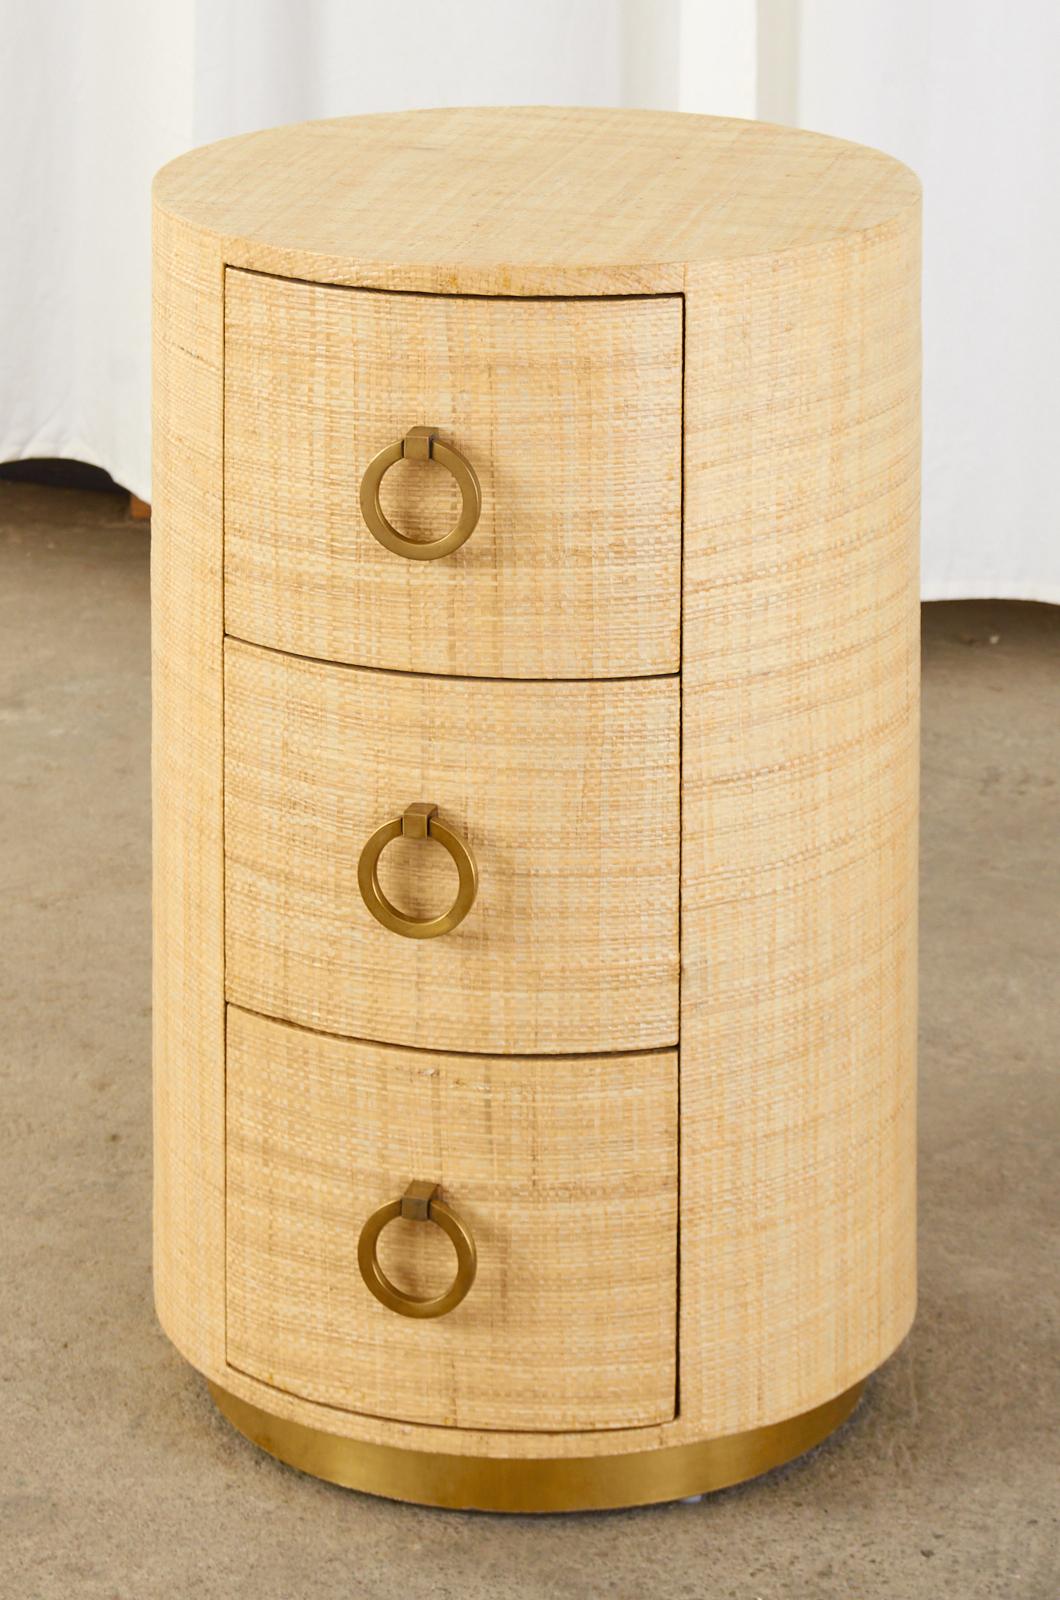 Chic circular nightstand or bed side table featuring an organic modern raffia grasscloth cladding or wrap. Made in the fabulous style and manner of Karl Springer. Crafted from radiant grained mahogany the circular column case has three storage